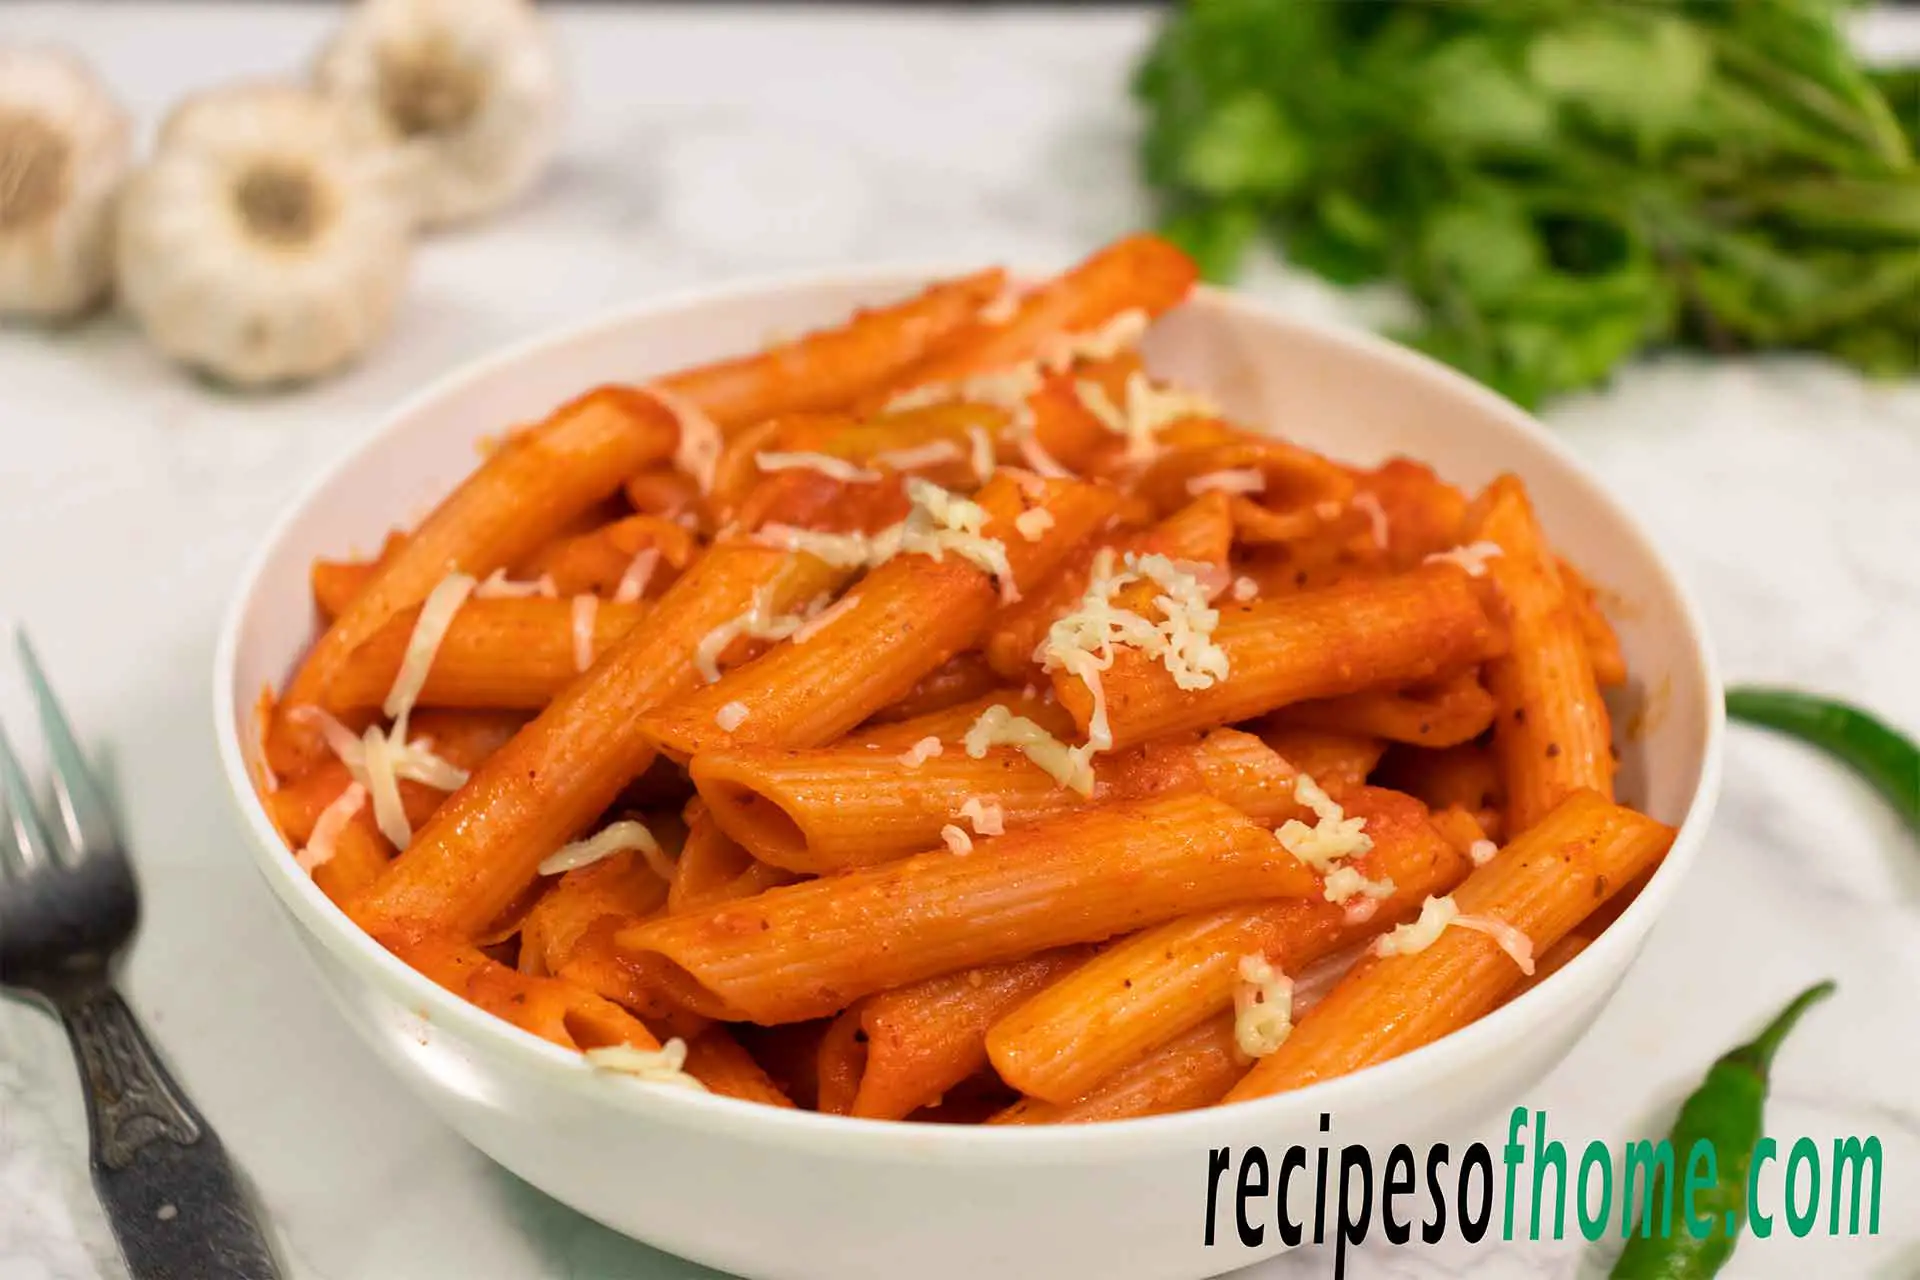 Red sauce pasta recipe | Pasta in red sauce | How to make red sauce pasta